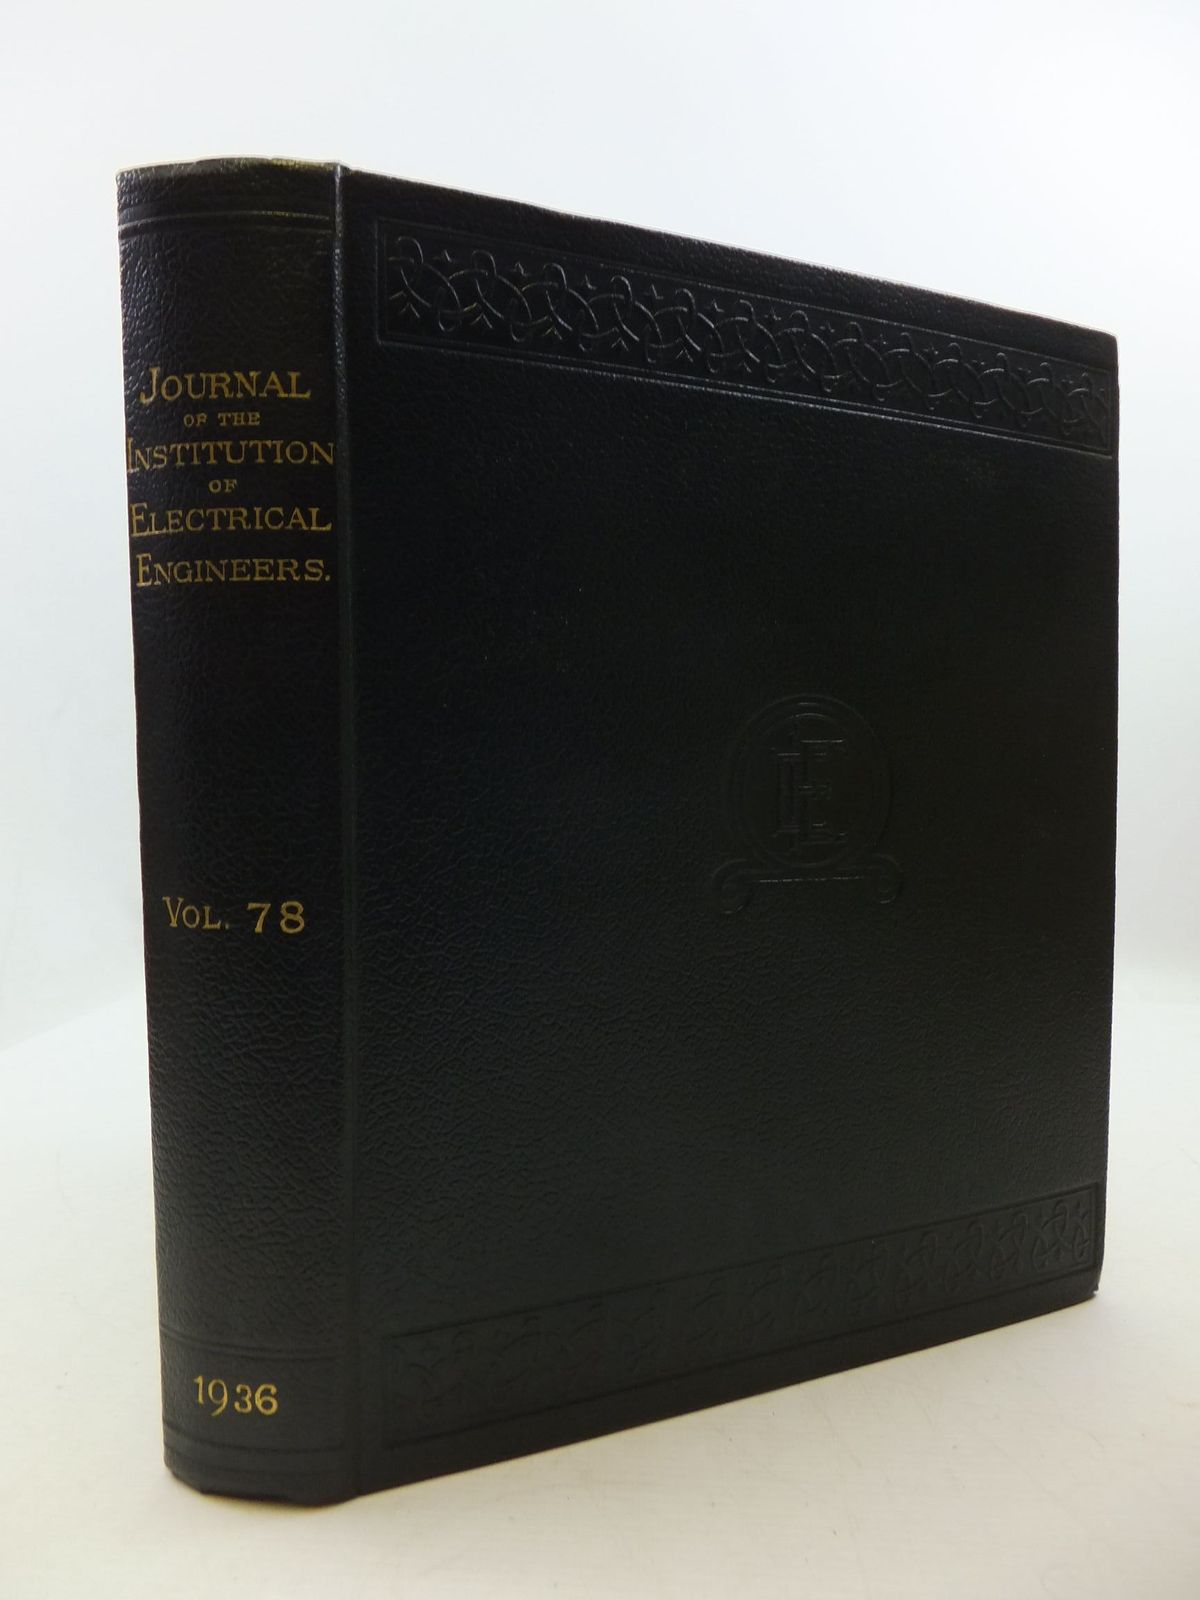 Photo of THE JOURNAL OF THE INSTITUTION OF ELECTRICAL ENGINEERS VOL. 78 written by Rowell, P.F. published by E. & F.N. Spon Limited (STOCK CODE: 2110422)  for sale by Stella & Rose's Books